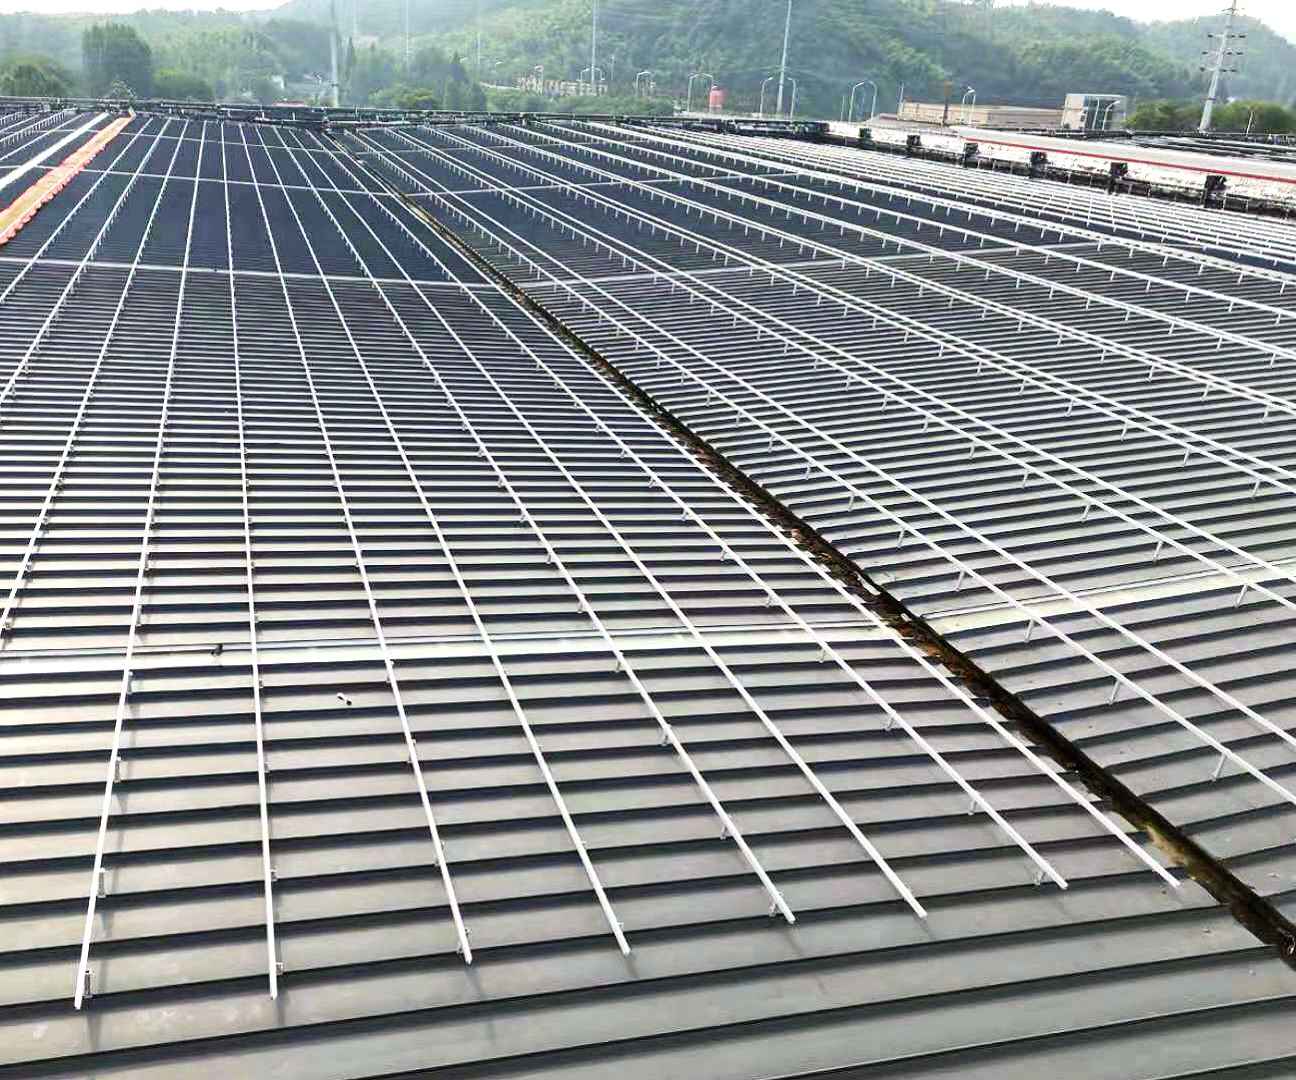 Tin Roof solar structure 7.9MW